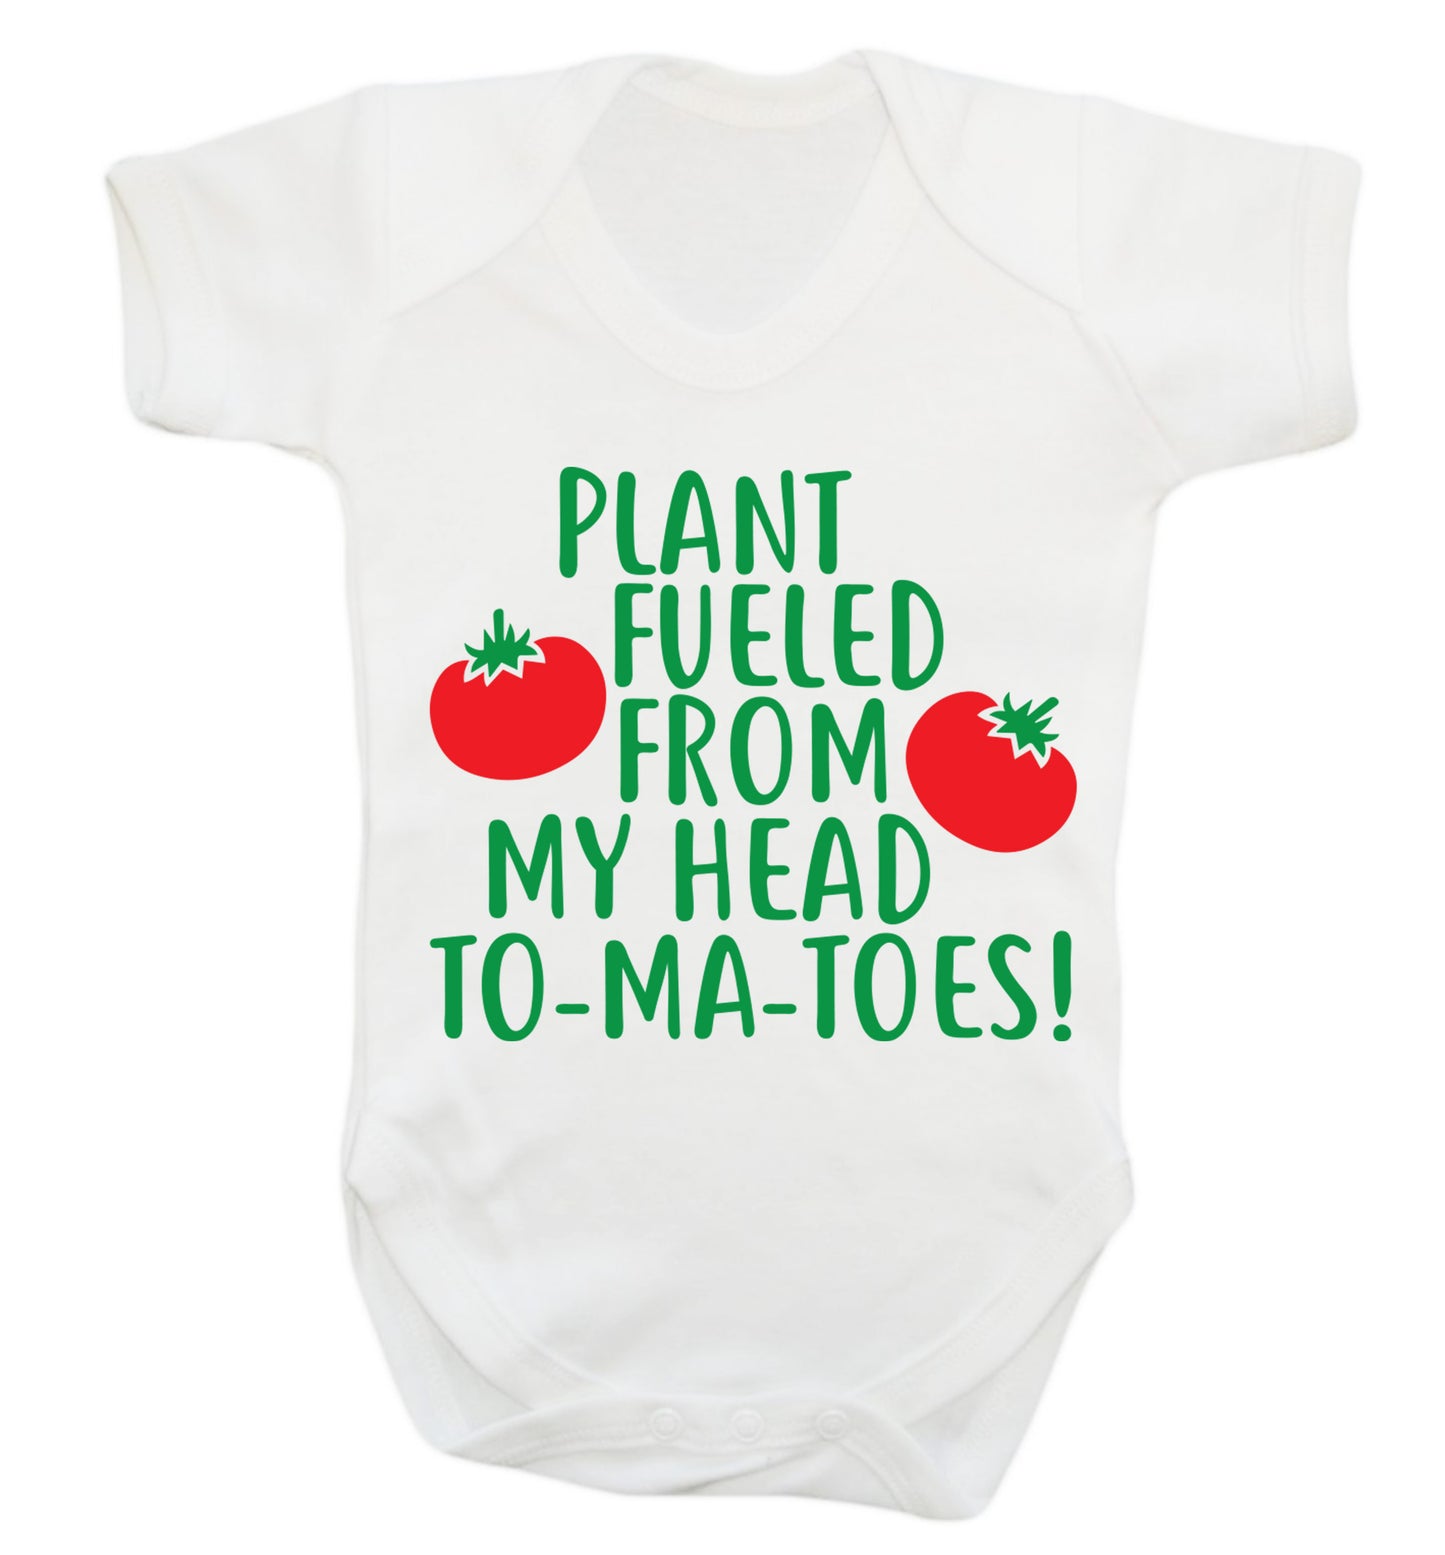 Plant fueled from my head to-ma-toes Baby Vest white 18-24 months